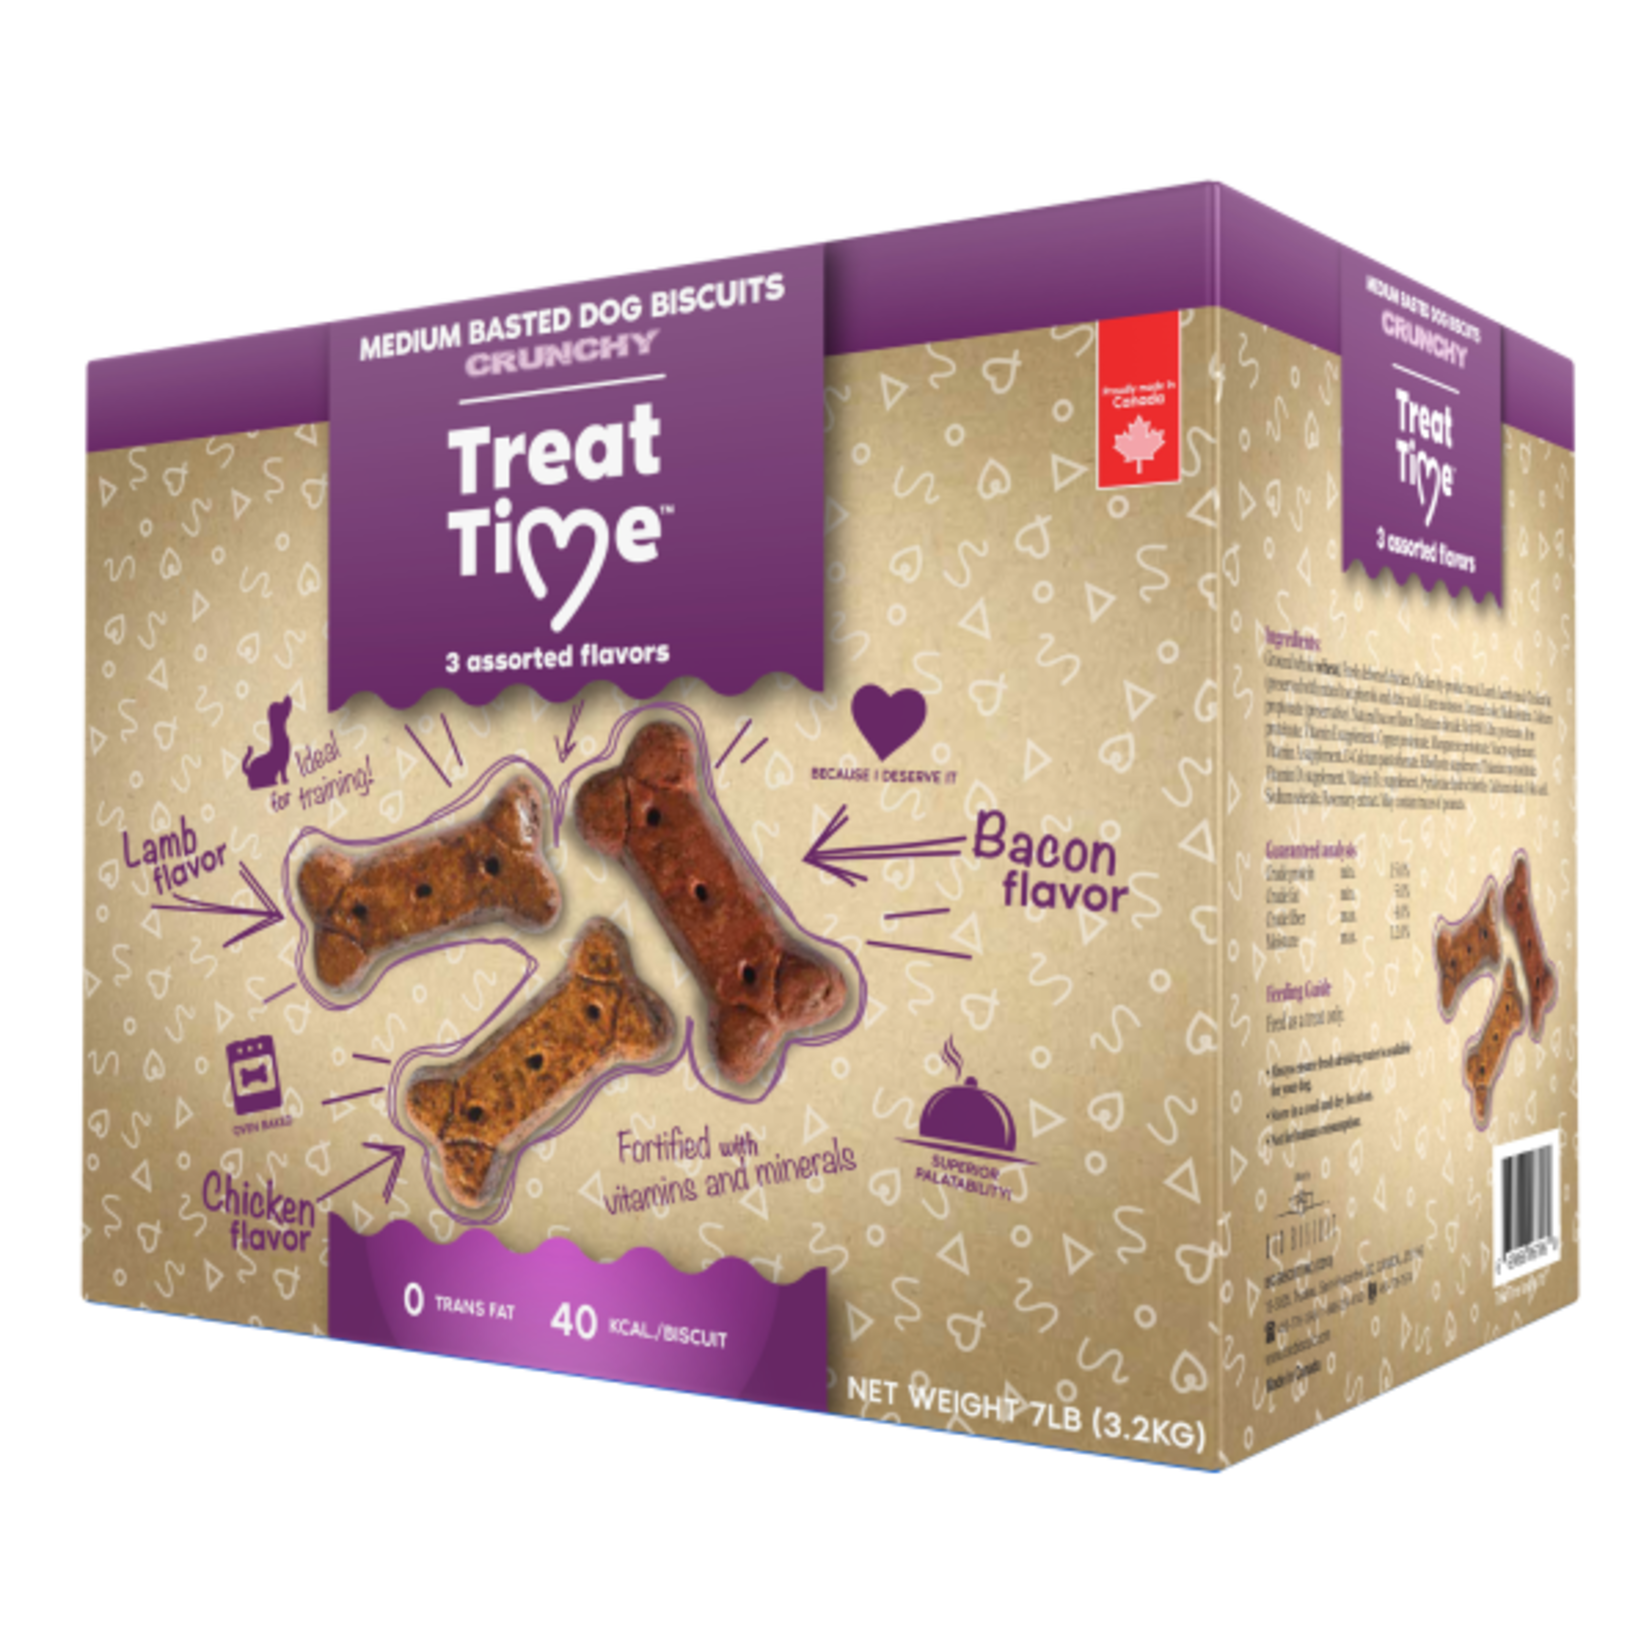 Treat Time Treat Time Medium Basted Biscuit 7 lb